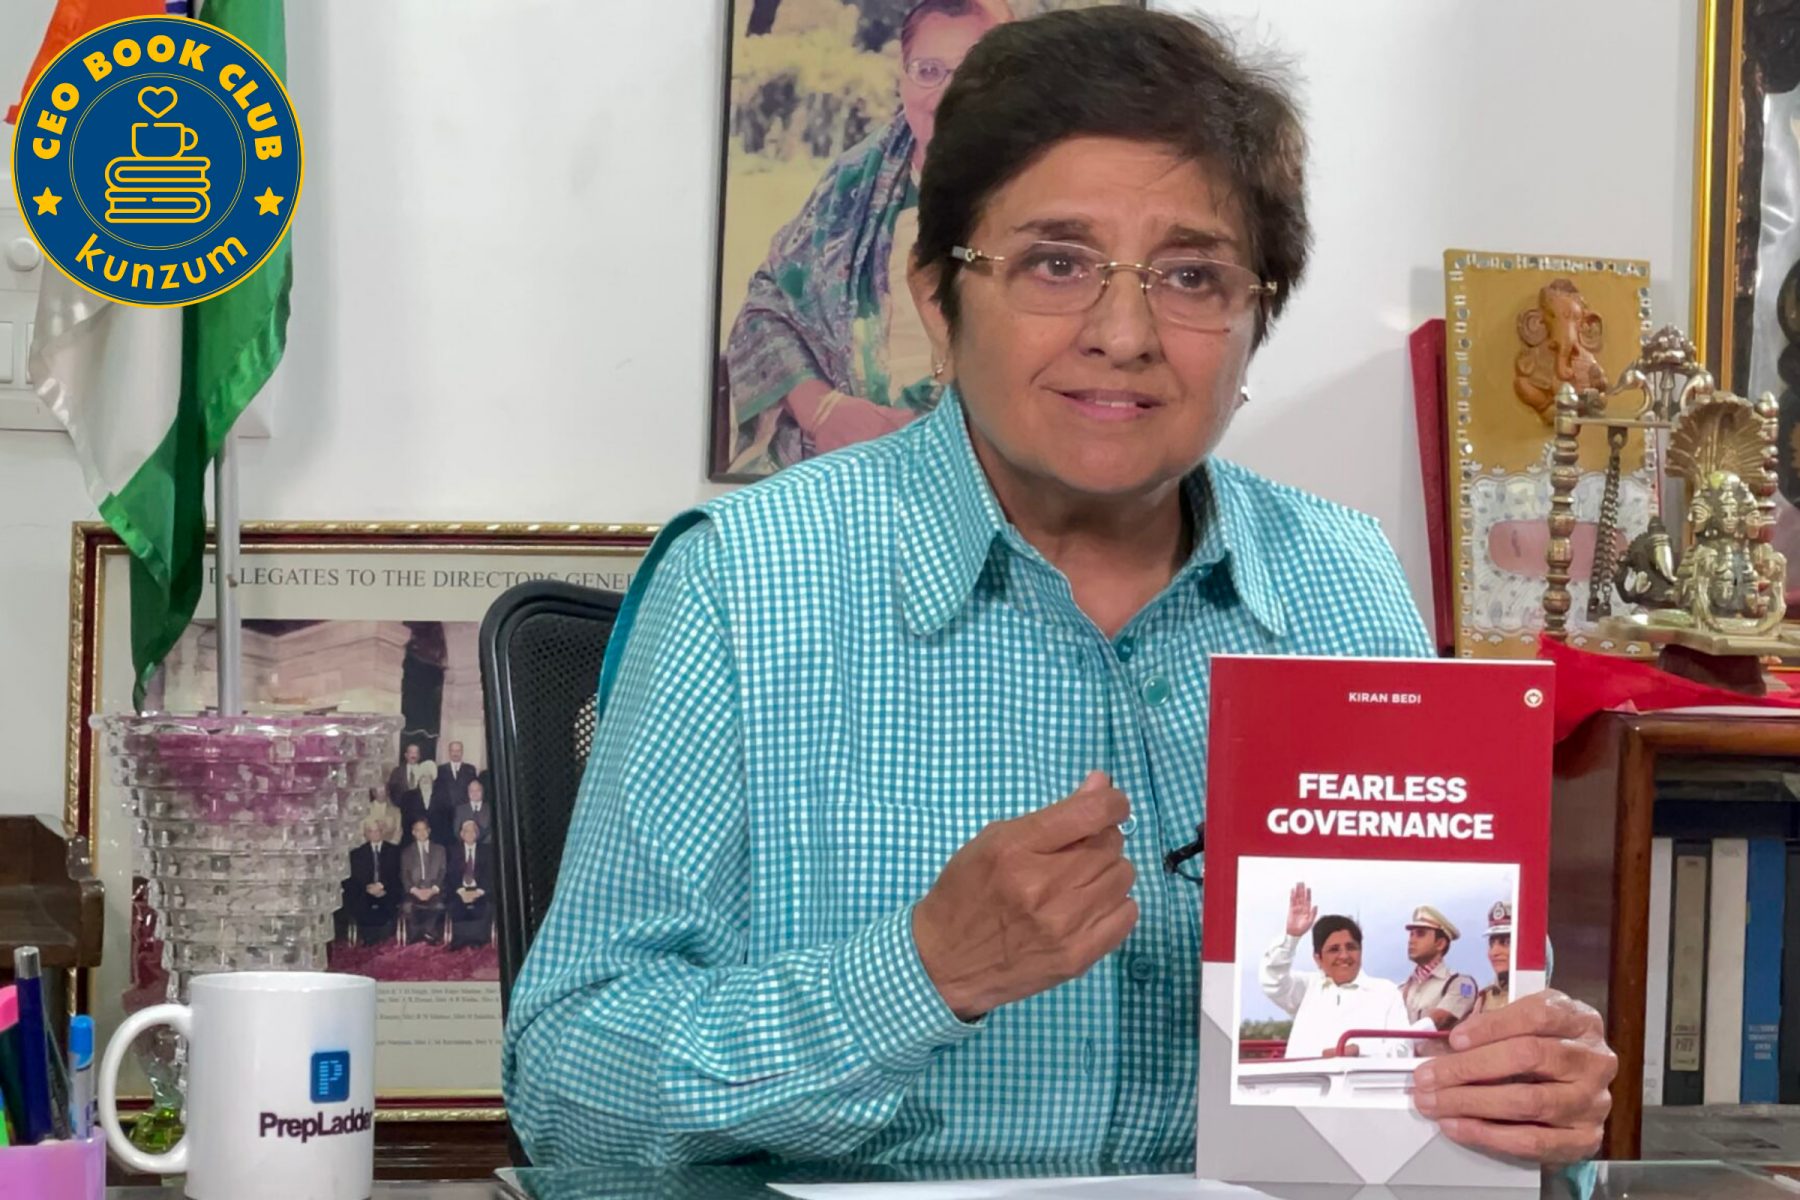 Fearless Governance: A Discussion With Dr Kiran Bedi – Gurgaon, May 8